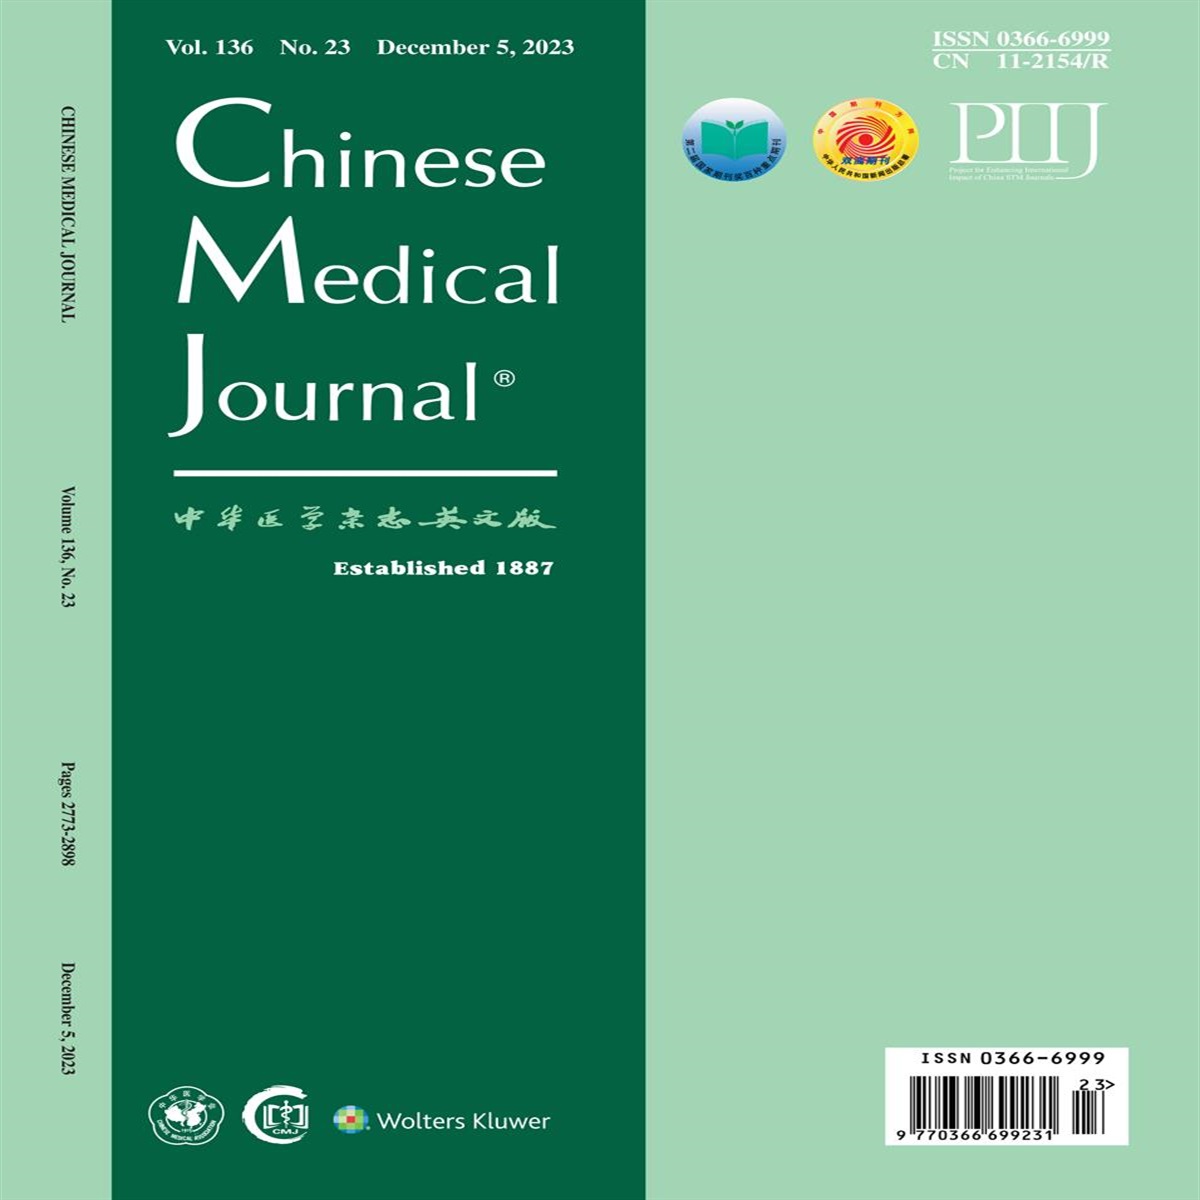 Updates in psoriasis diagnosis and treatment status in China: results from the National Psoriasis Center Registry